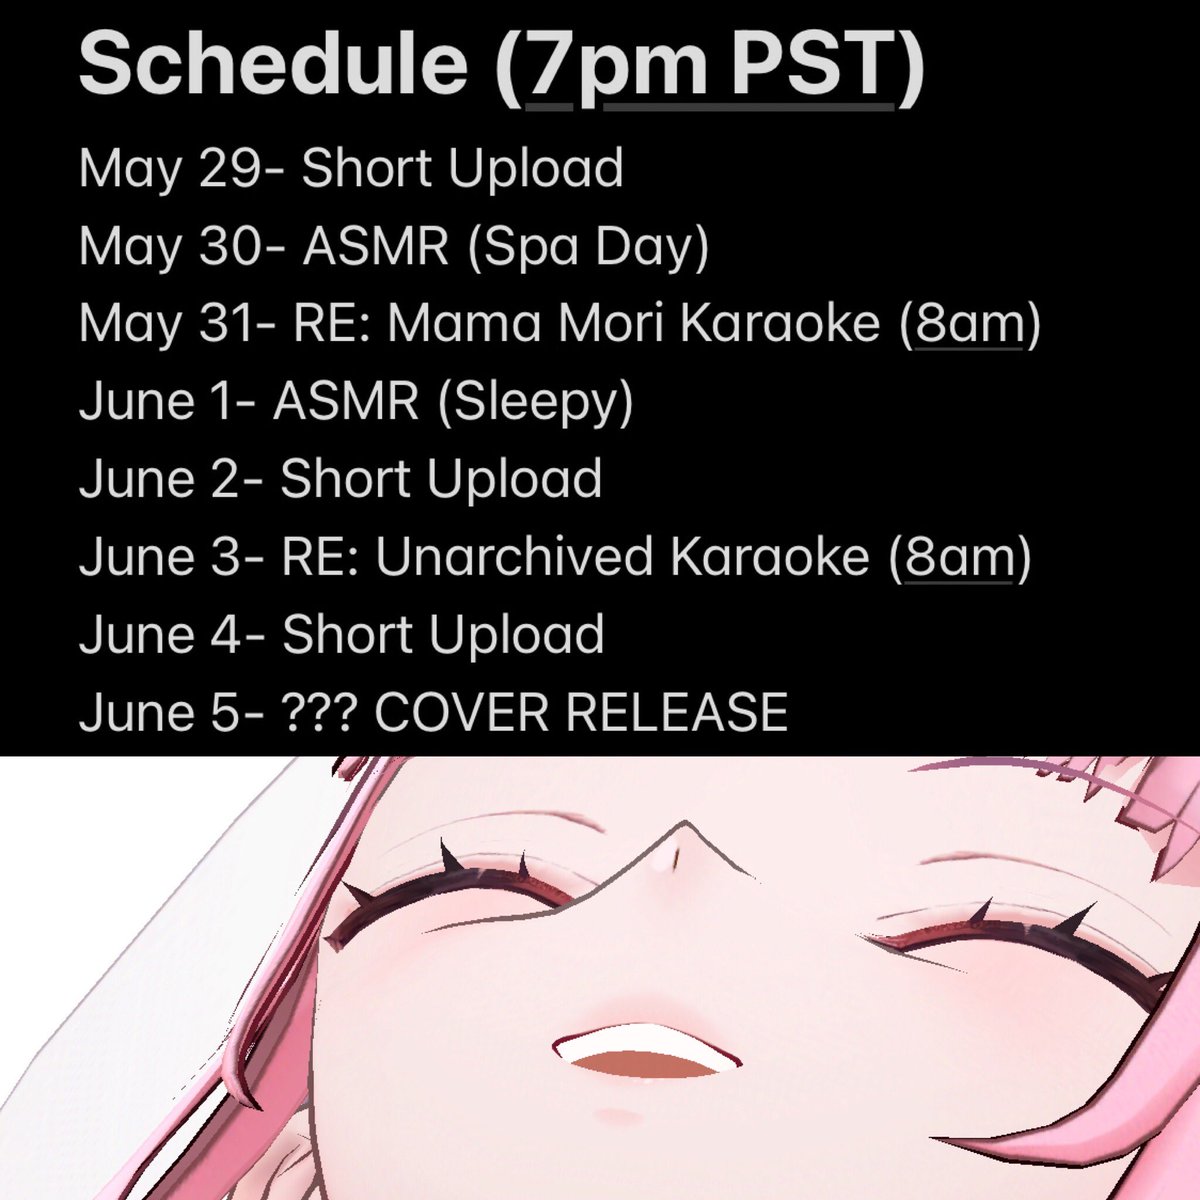 quick schedule! 

grim reap is going on vacation but don’t worry, content every day for my dead beats. ╰(*´︶`*)╯♡